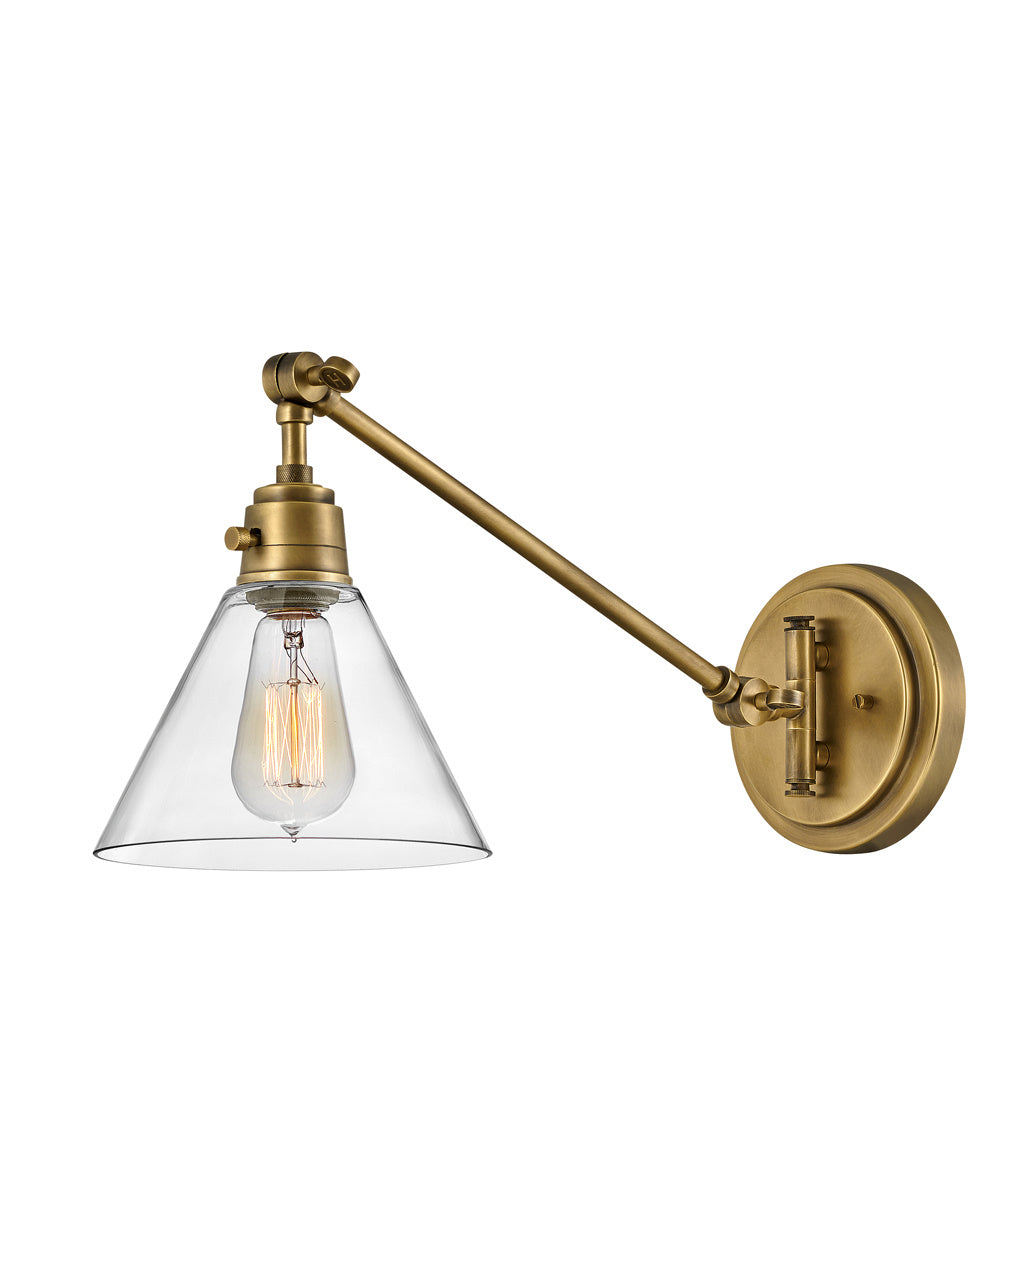 Hinkley - 3690HB-CL - LED Wall Sconce - Arti - Heritage Brass